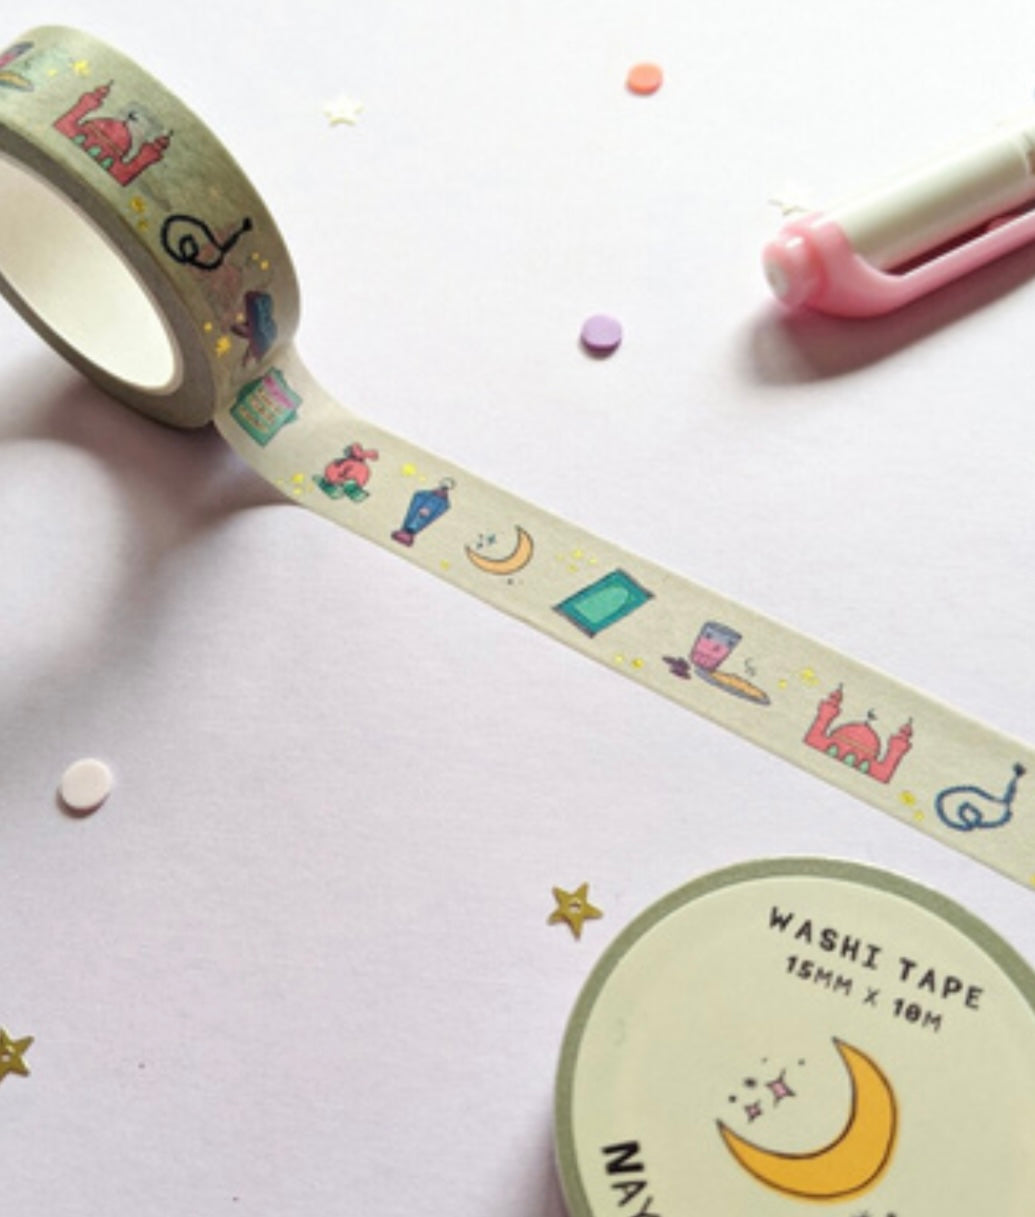 Beauty of our Deen - Washi tape